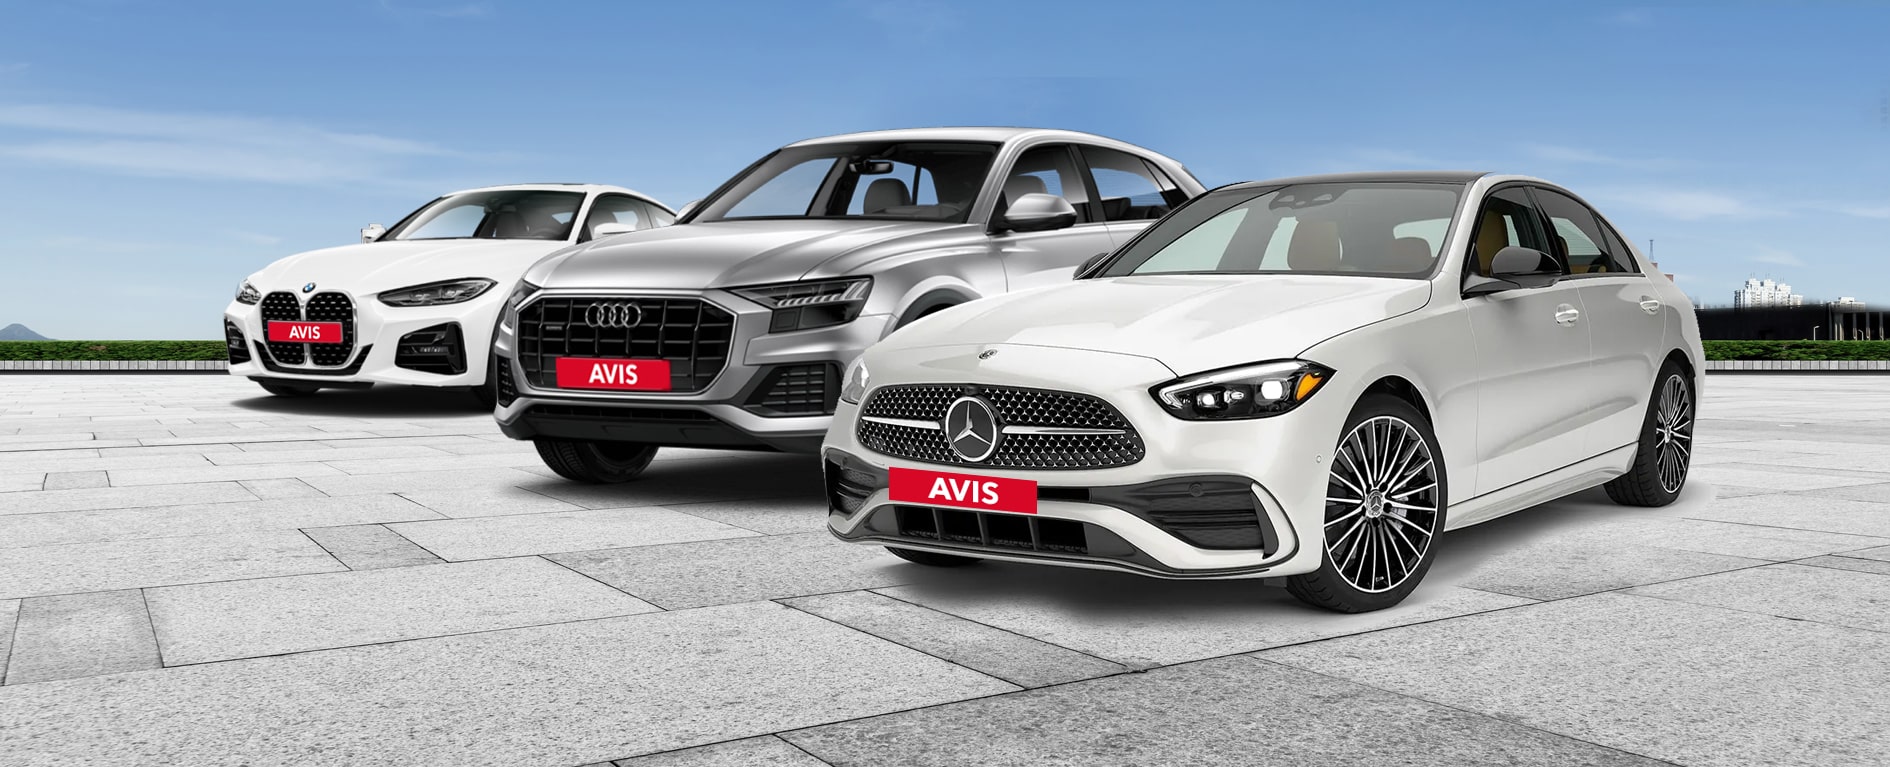 Book from a range of luxury vehicles from Avis Luxury Car South Africa.